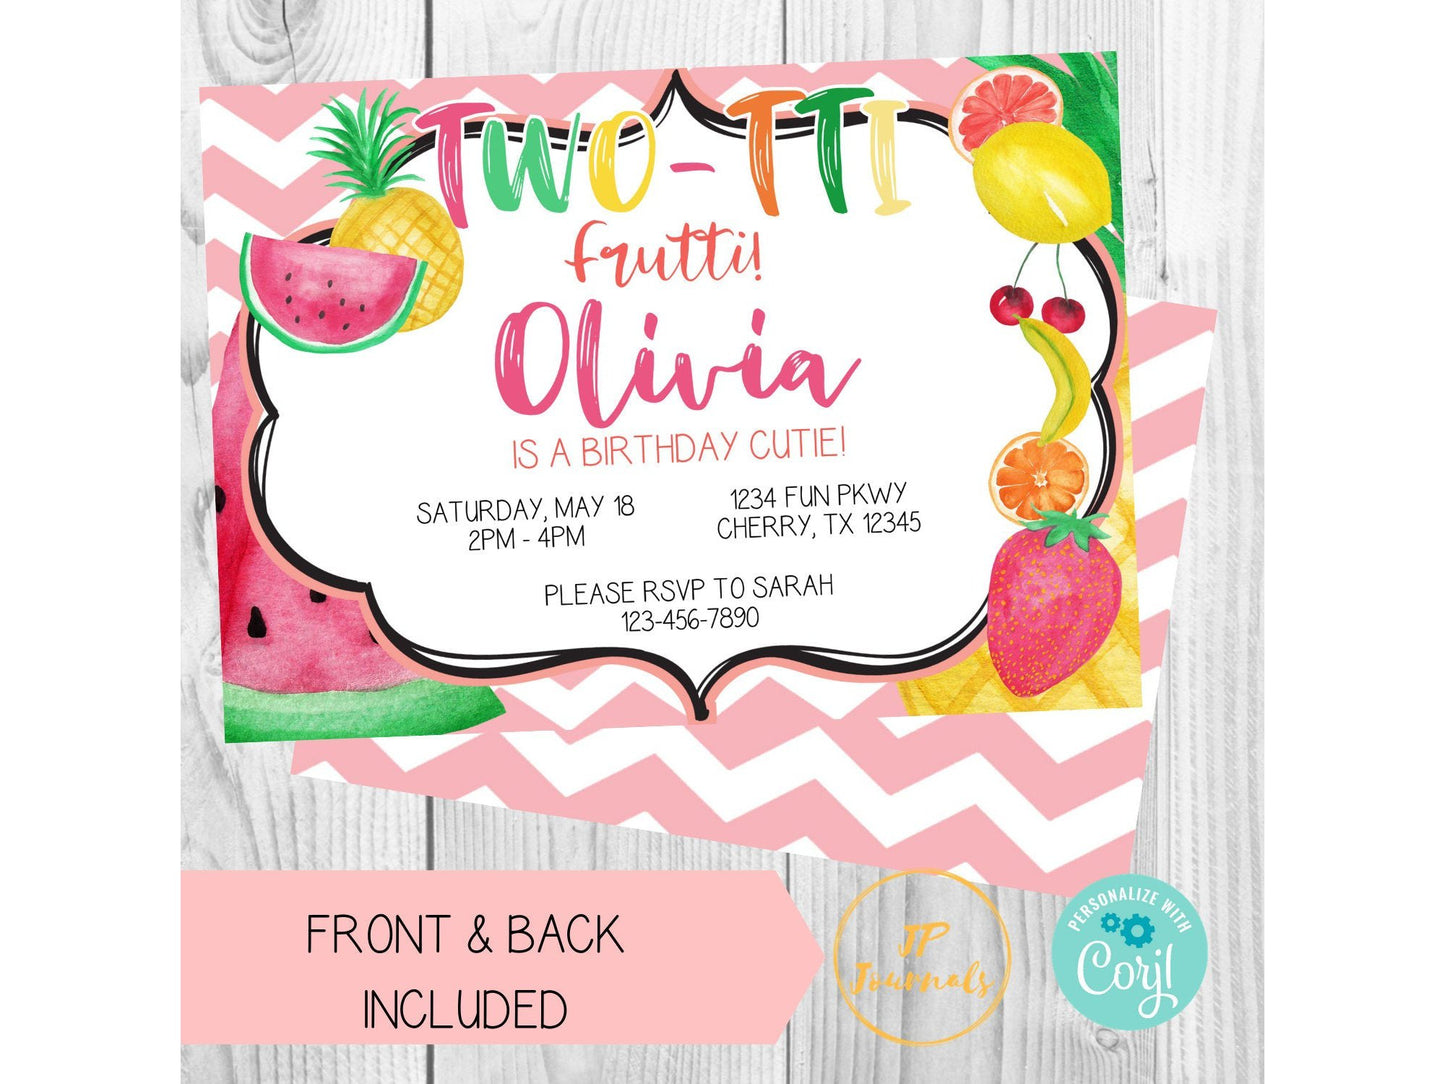 Two-tti Frutti 2nd Birthday Party Invitation - DIY Edit and Customize Printable Invite - Download & Print at Home! Watercolor Fruit Pink